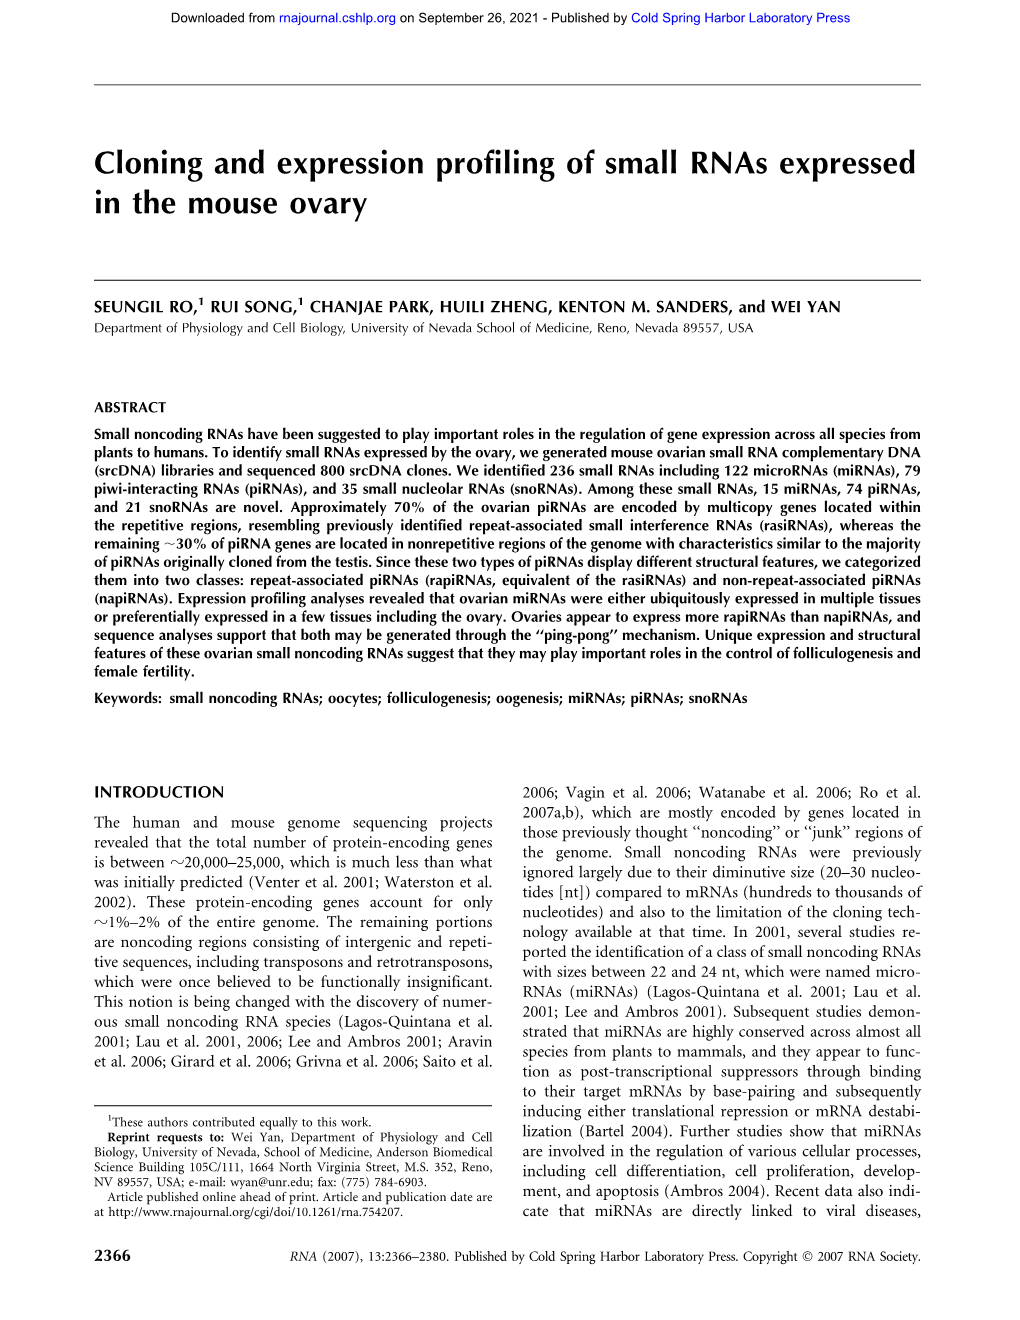 Cloning and Expression Profiling of Small Rnas Expressed in the Mouse Ovary